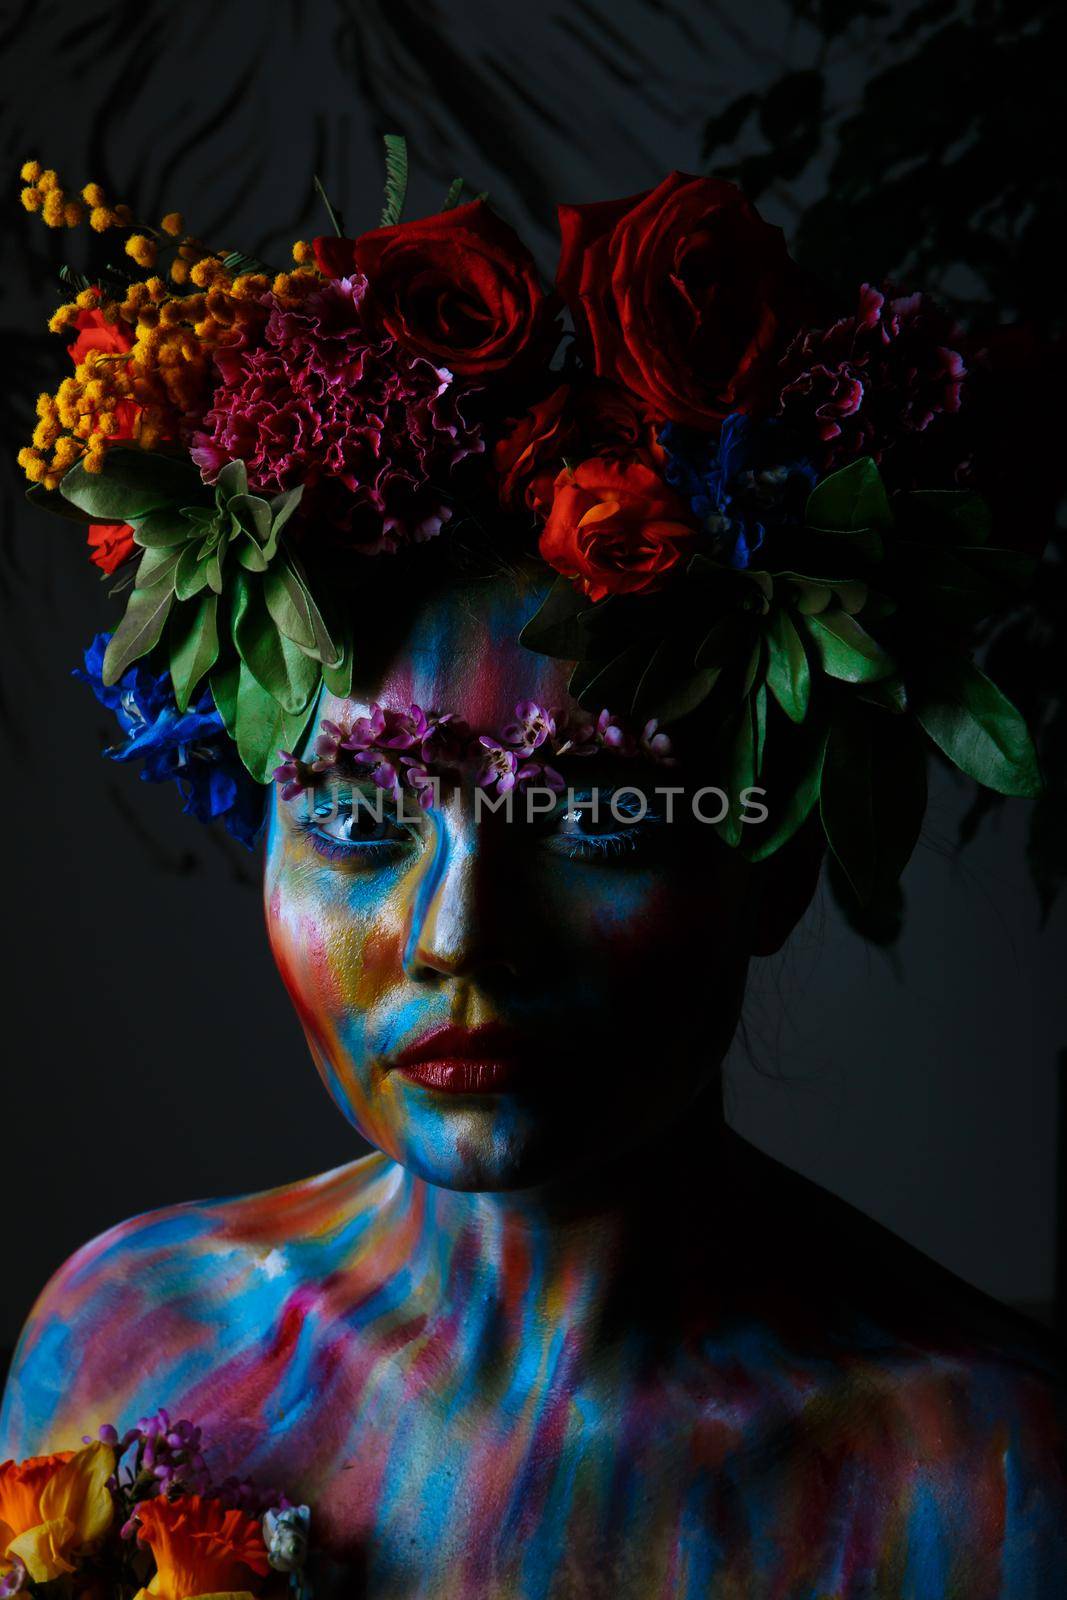 Portrait of a girl whose face is painted with colored paints in a wreath of flowers.